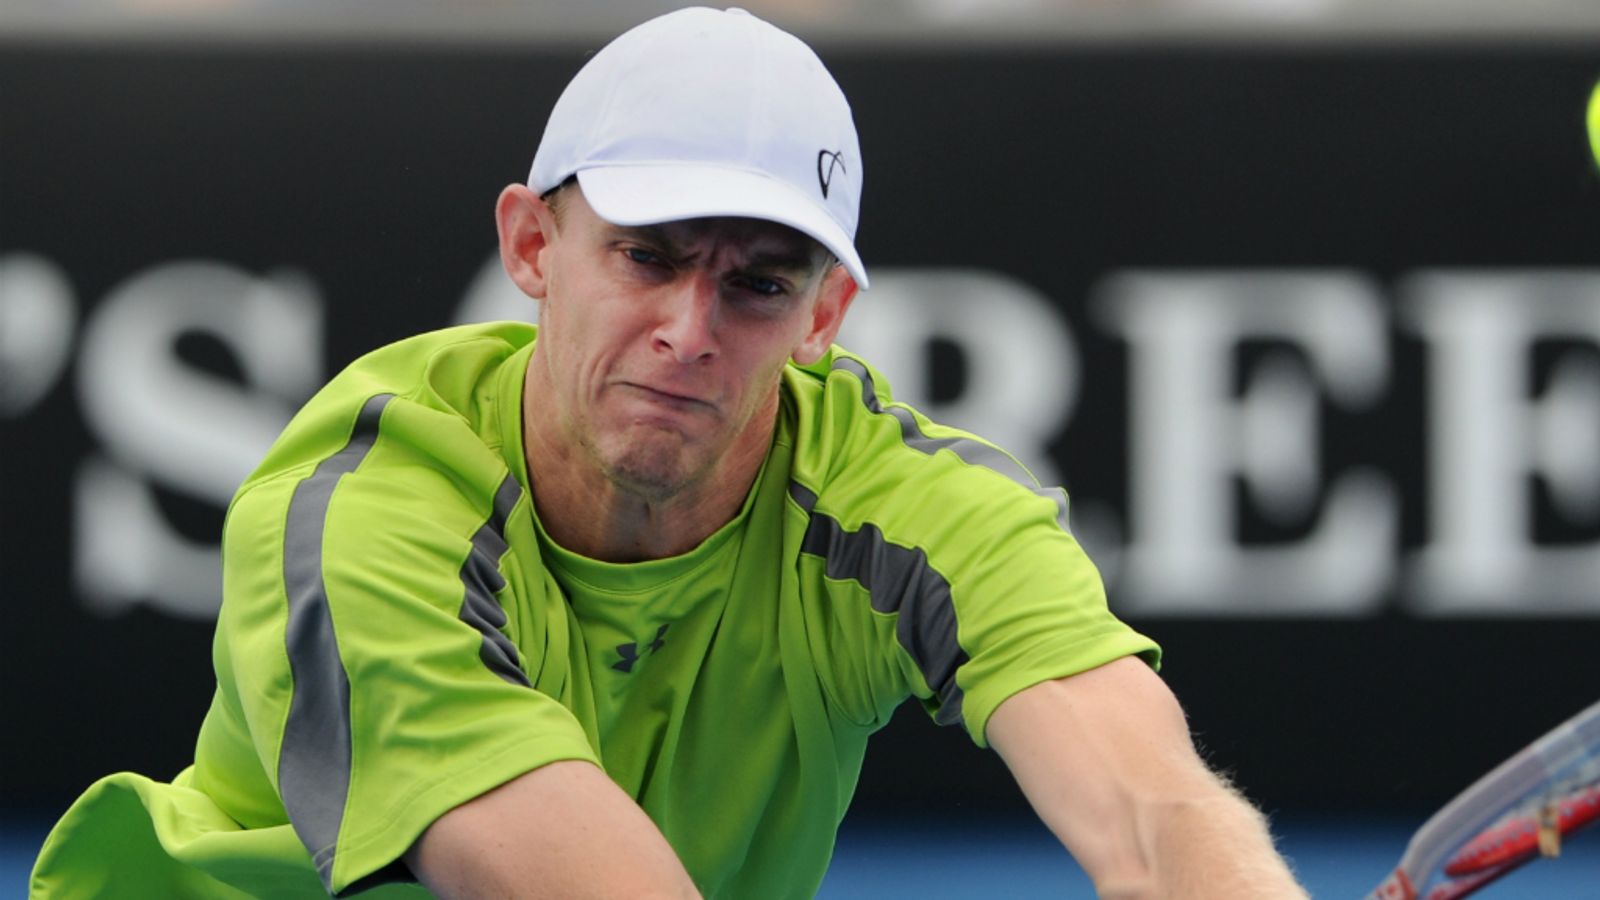 Anderson to face qualifier | Tennis News | Sky Sports